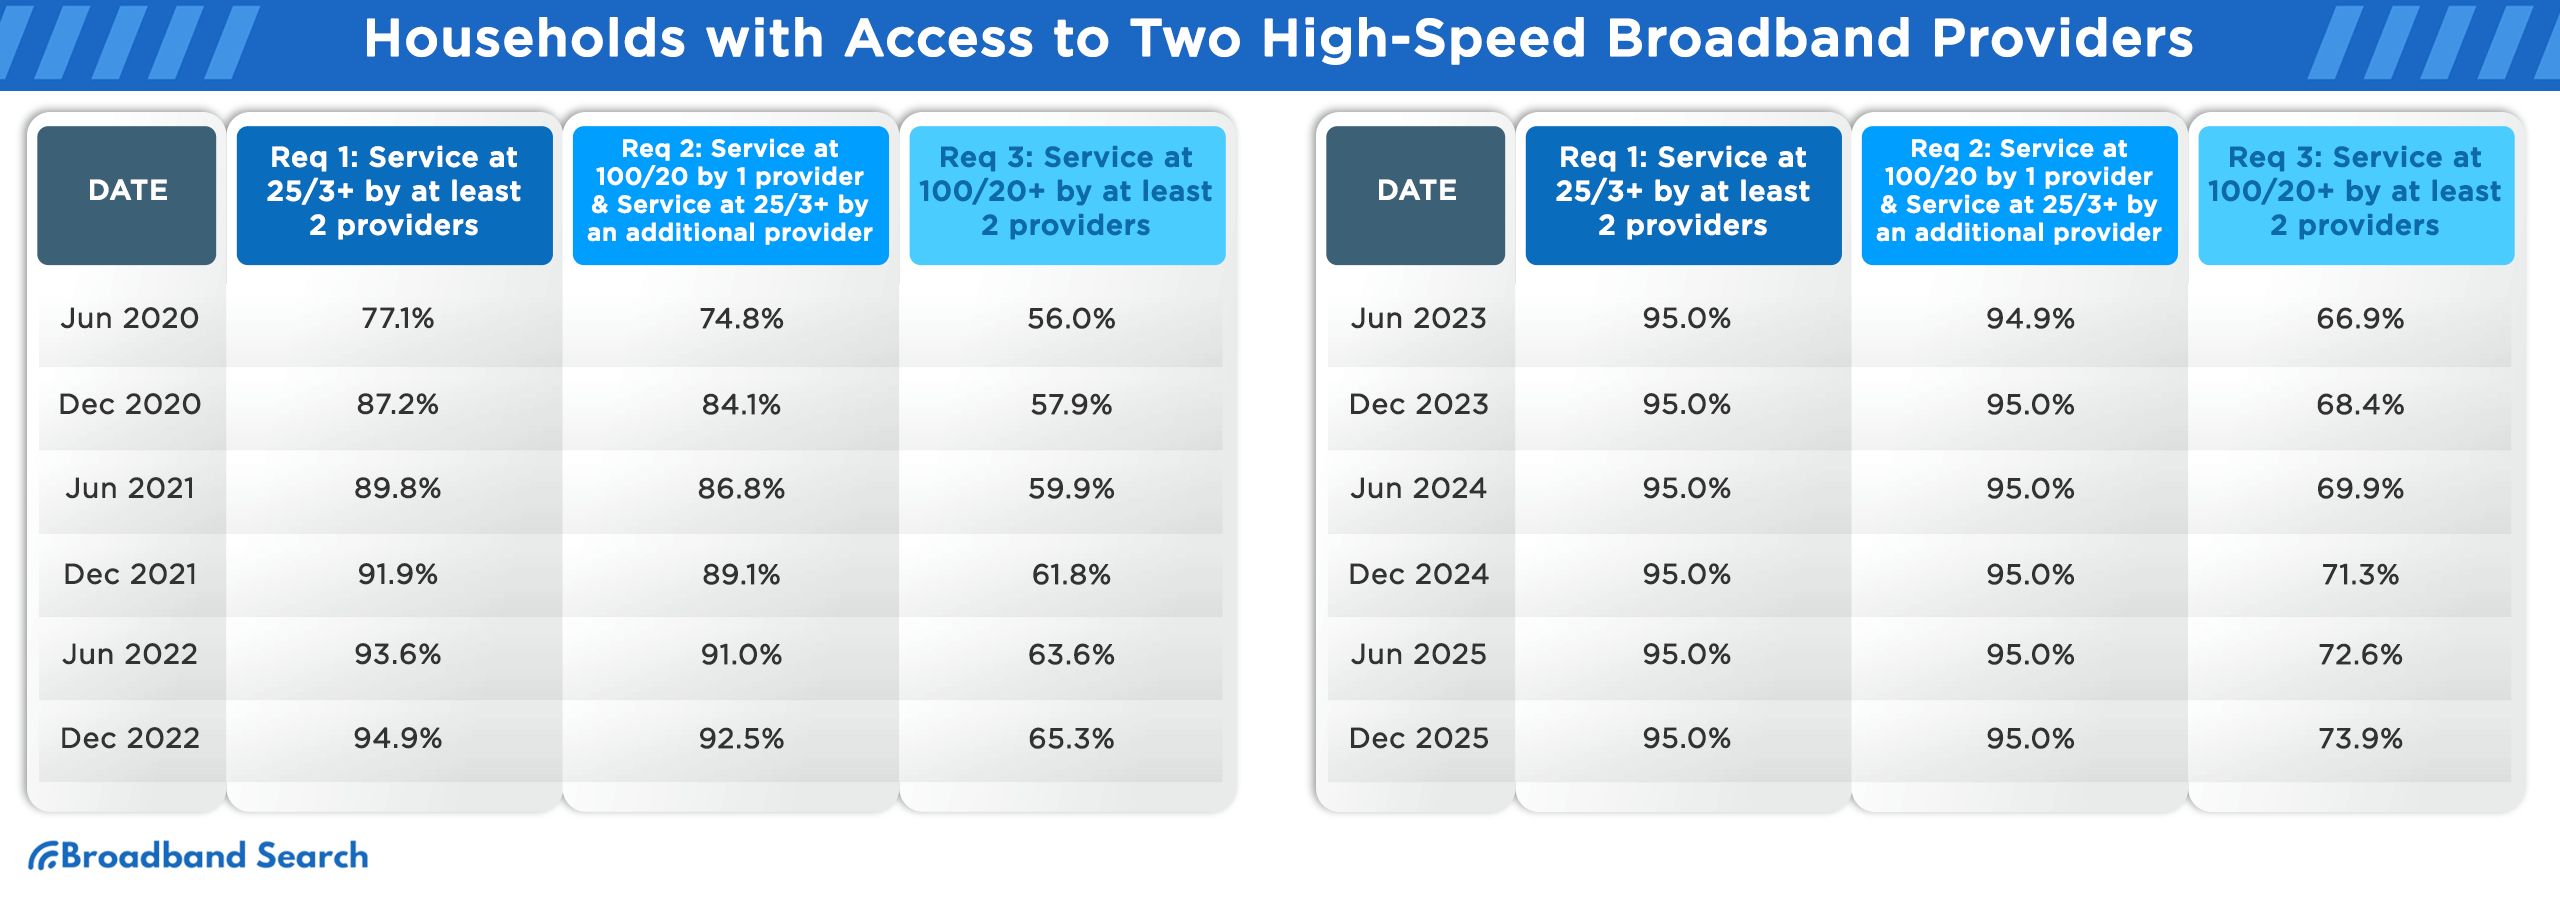 Households with access to two high-speed broadband service providers